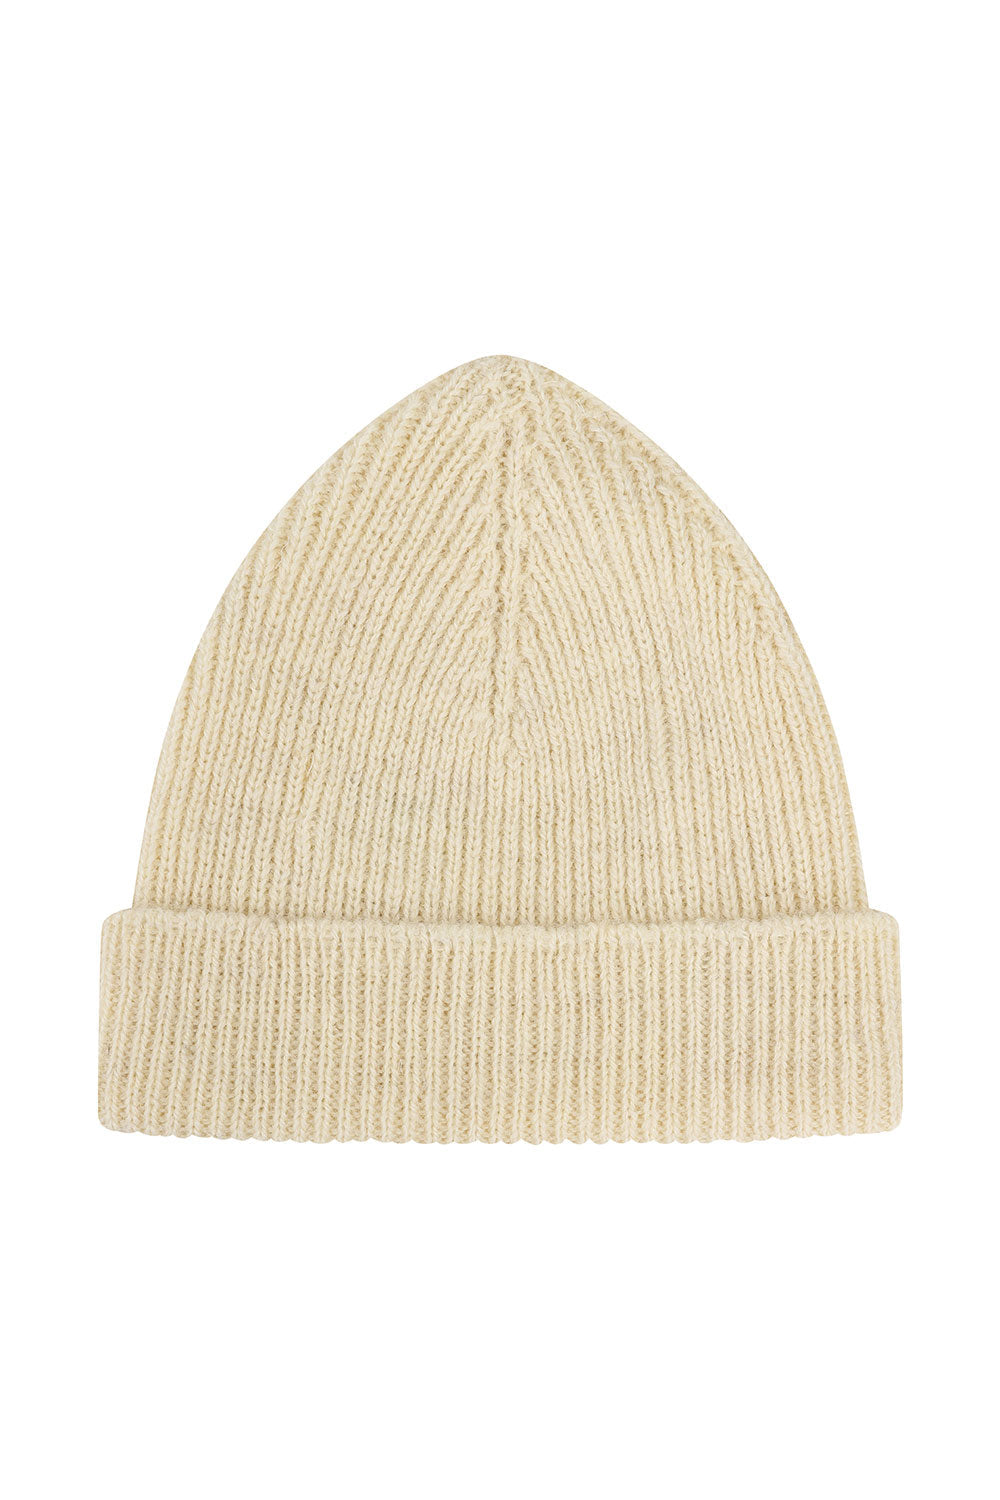 Uskees Undyed British Wool Hat - Light Oat